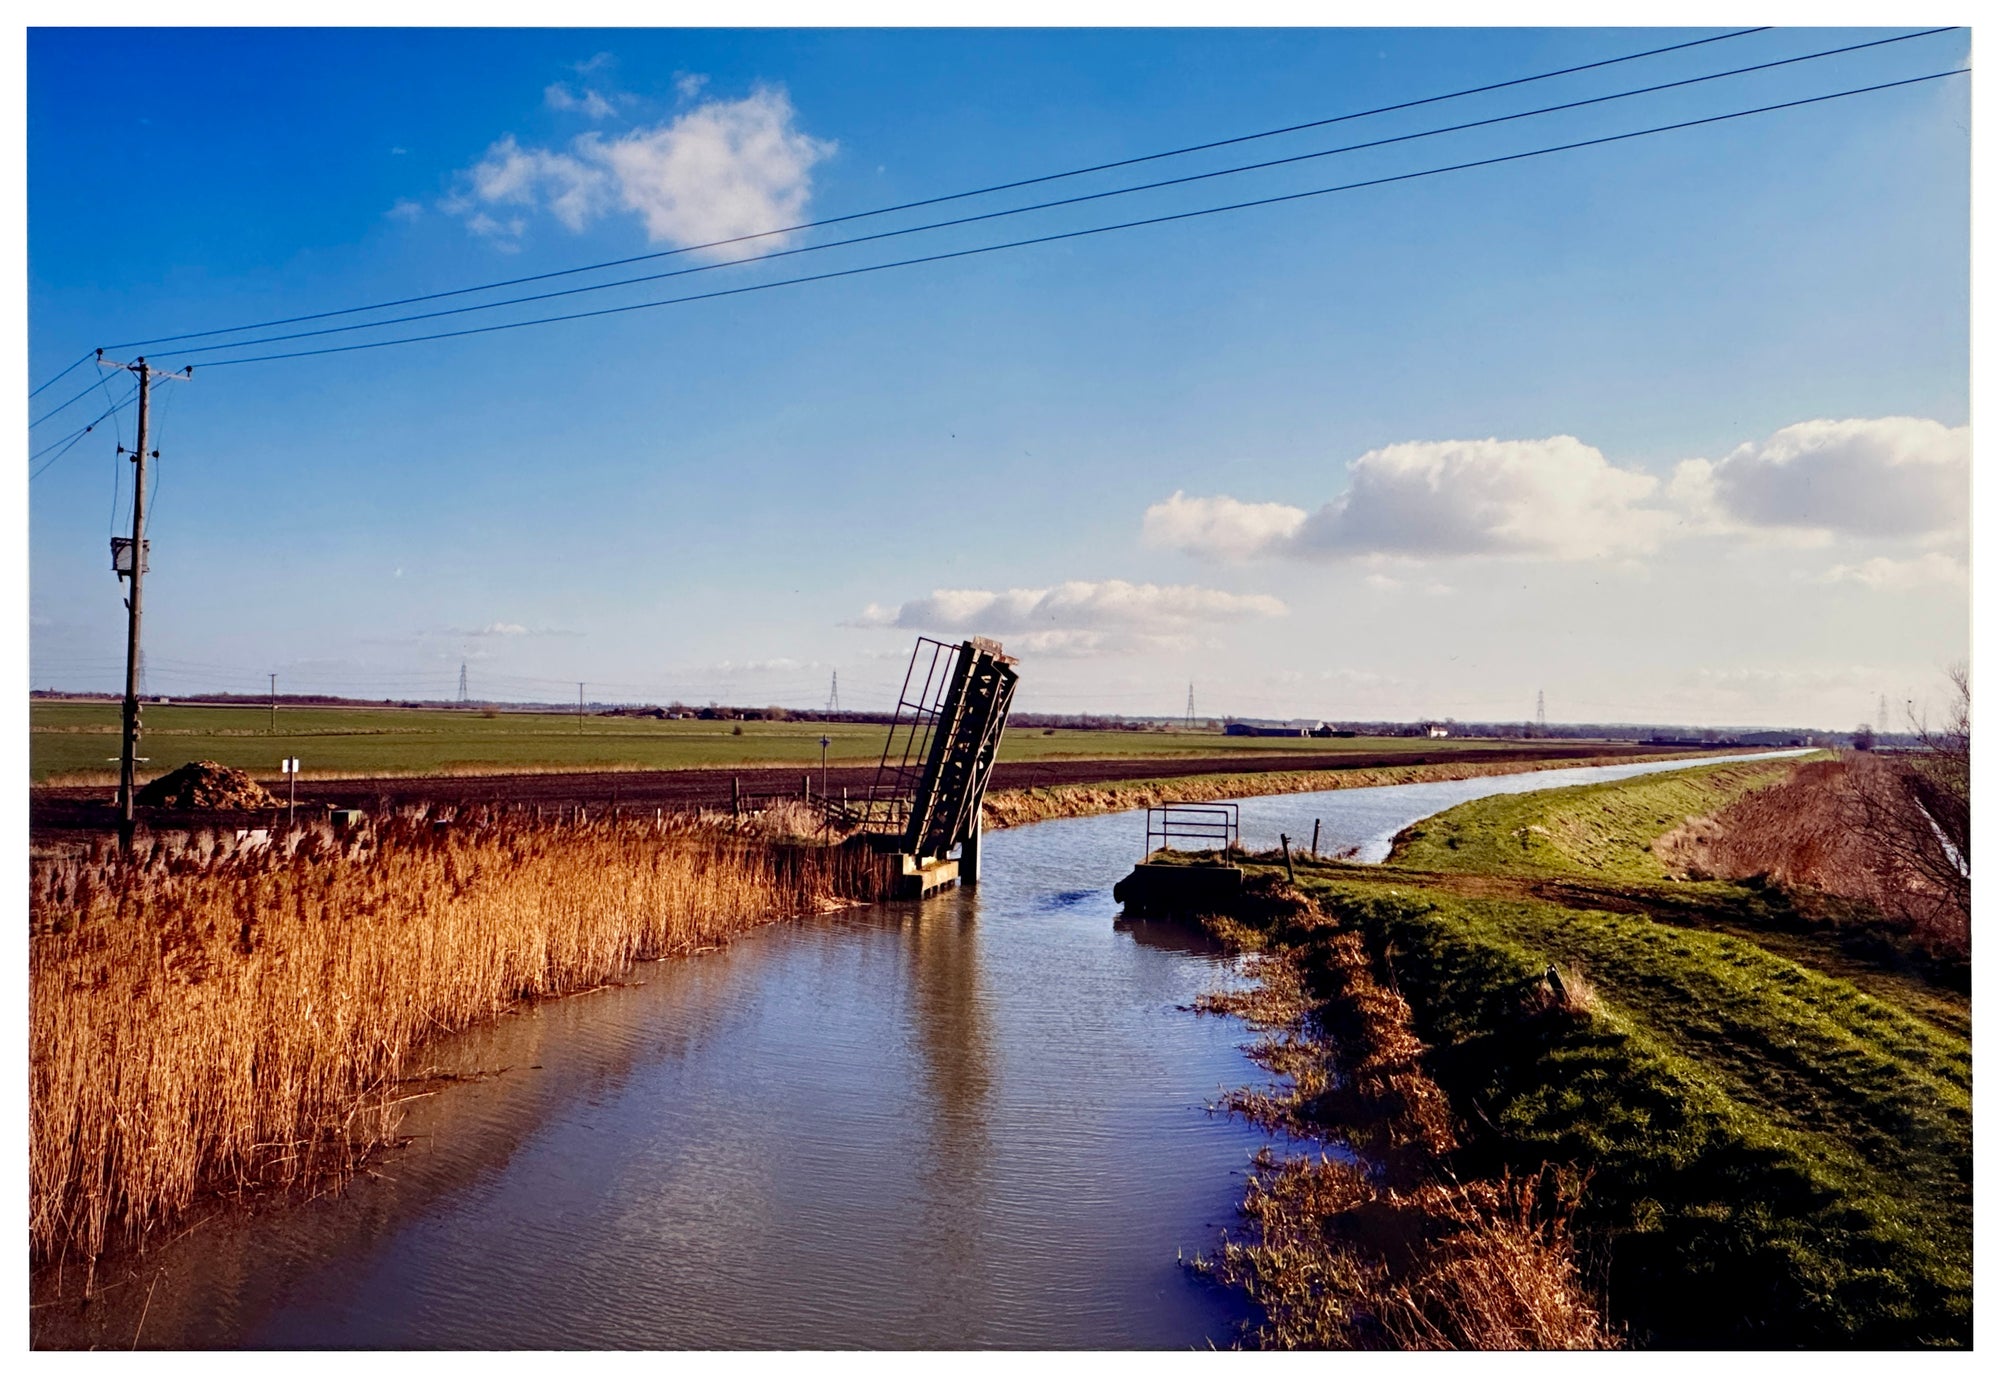 Photograph by Richard Heeps. Fenland waterway with a weight drain up in the middle. Fenland sits either side and there is a blue sky.